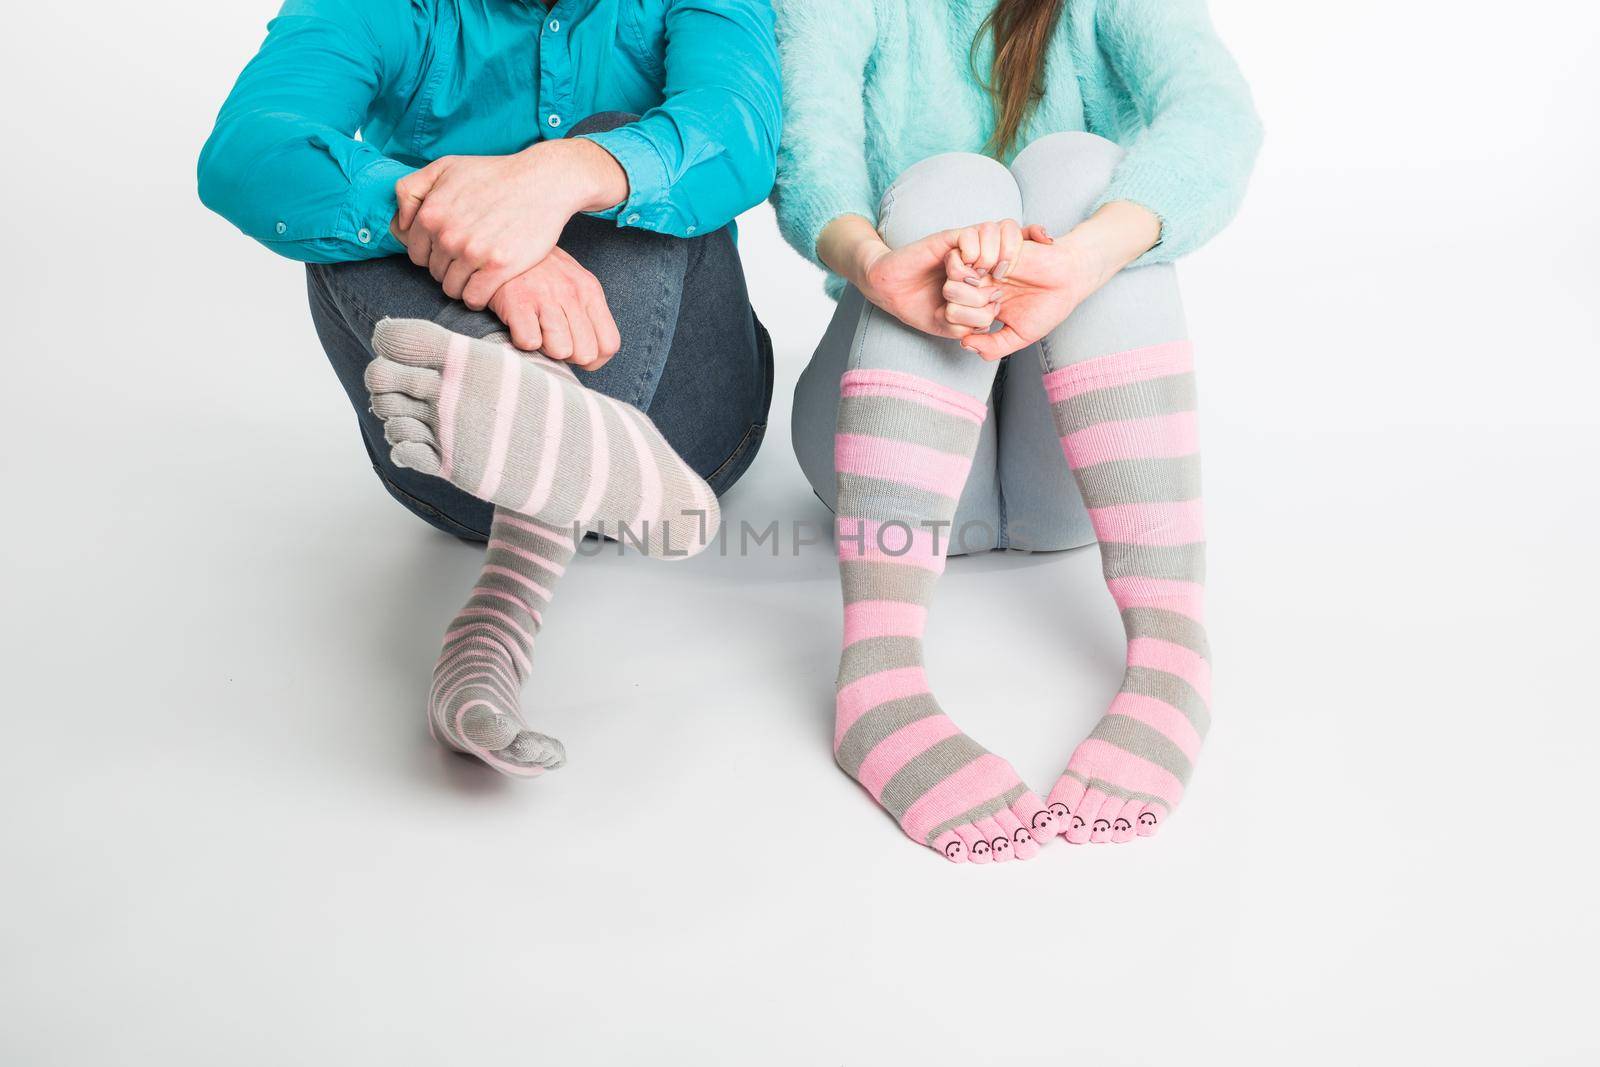 Valentine's day concept - Male and female legs in socks